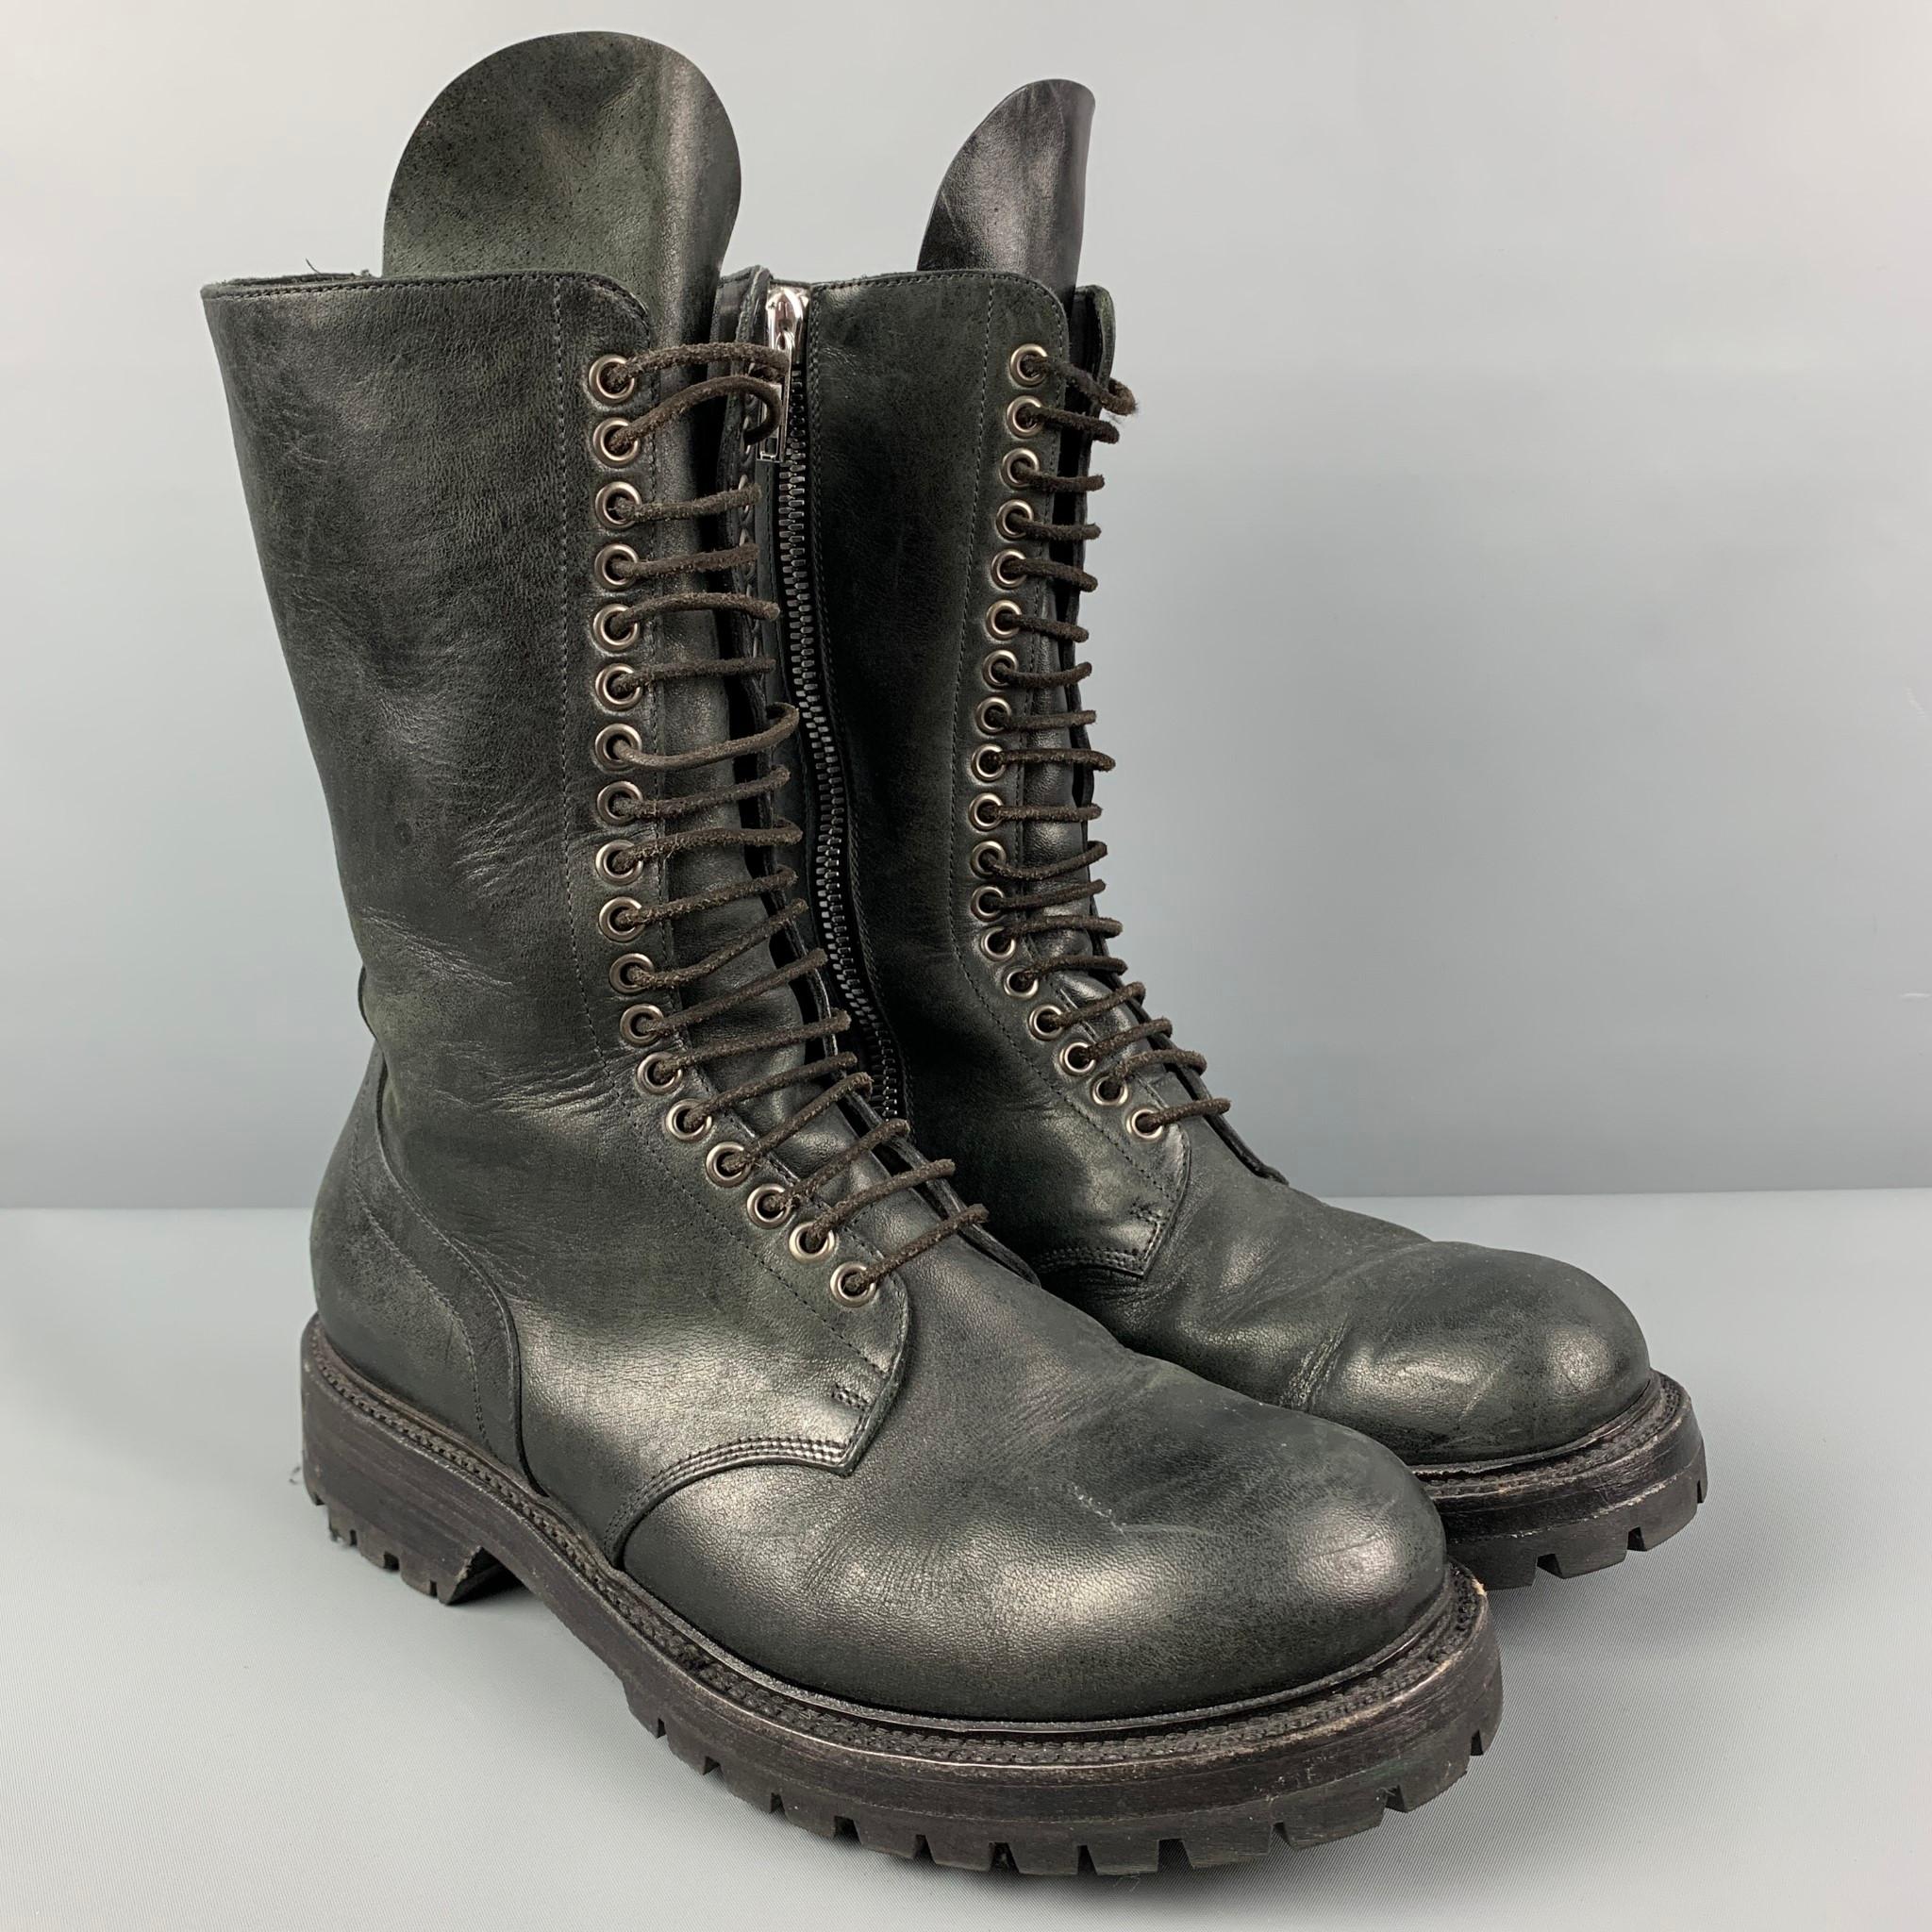 RICK OWENS boots comes in a black leather featuring a military style, round toe, side zipper detail, and a lace up closure. Includes dust bag. Made in Italy. 

Good Pre-Owned Condition. Minor wear. As-Is.
Marked: 43
Original Retail Price: